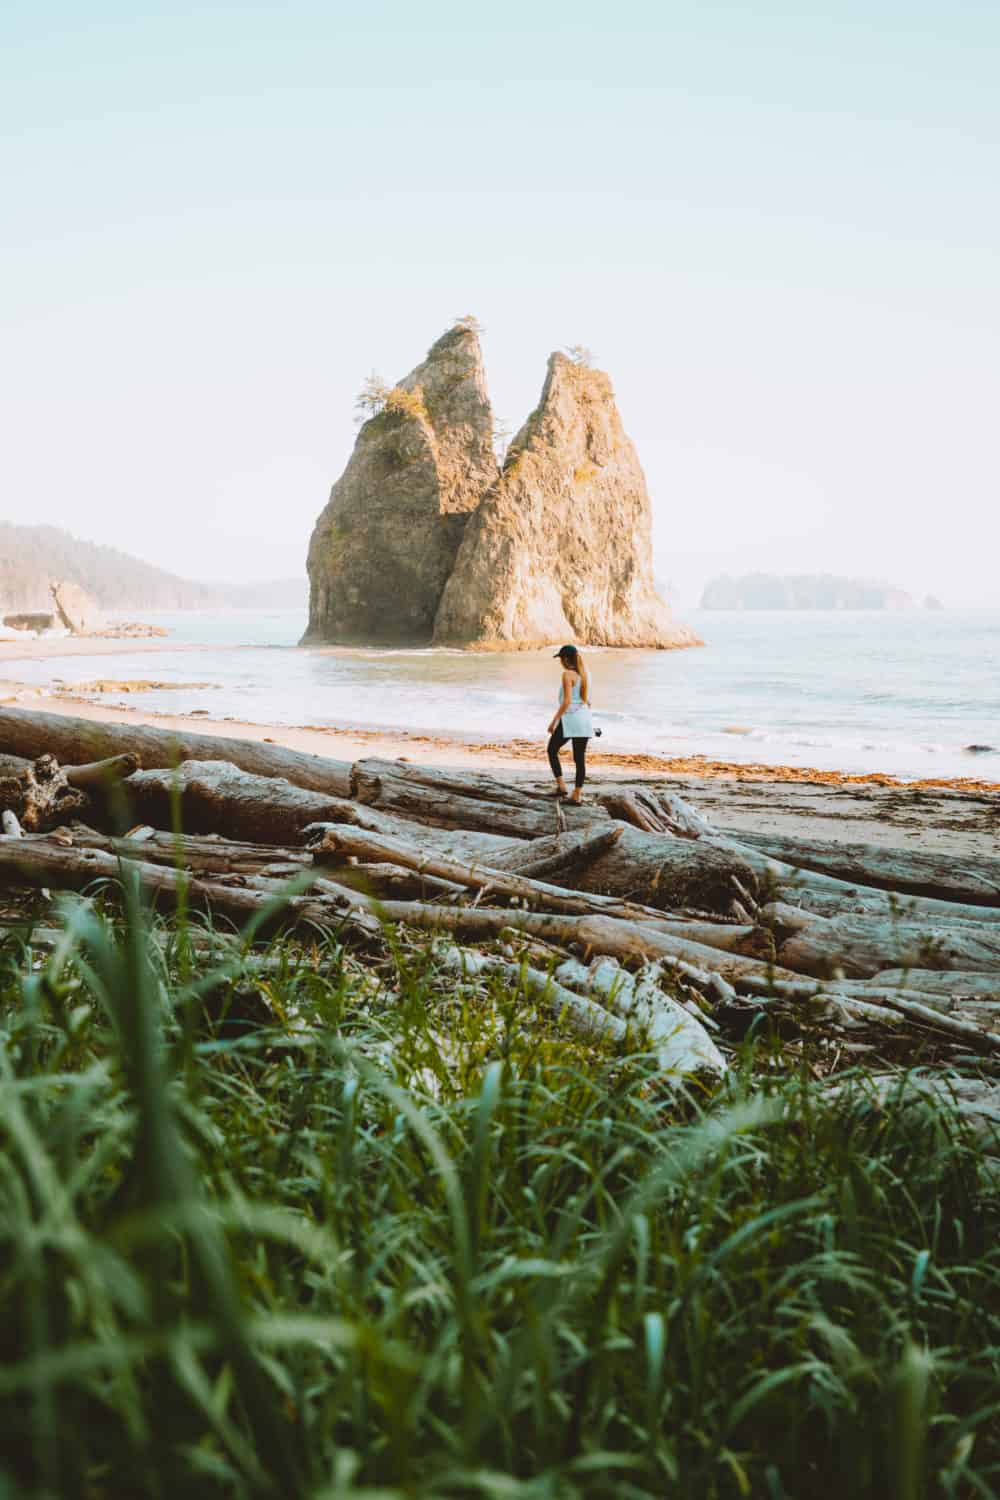 Emily Mandagie standing next to Sea stacks at Rialto Beach, Olympic National Park